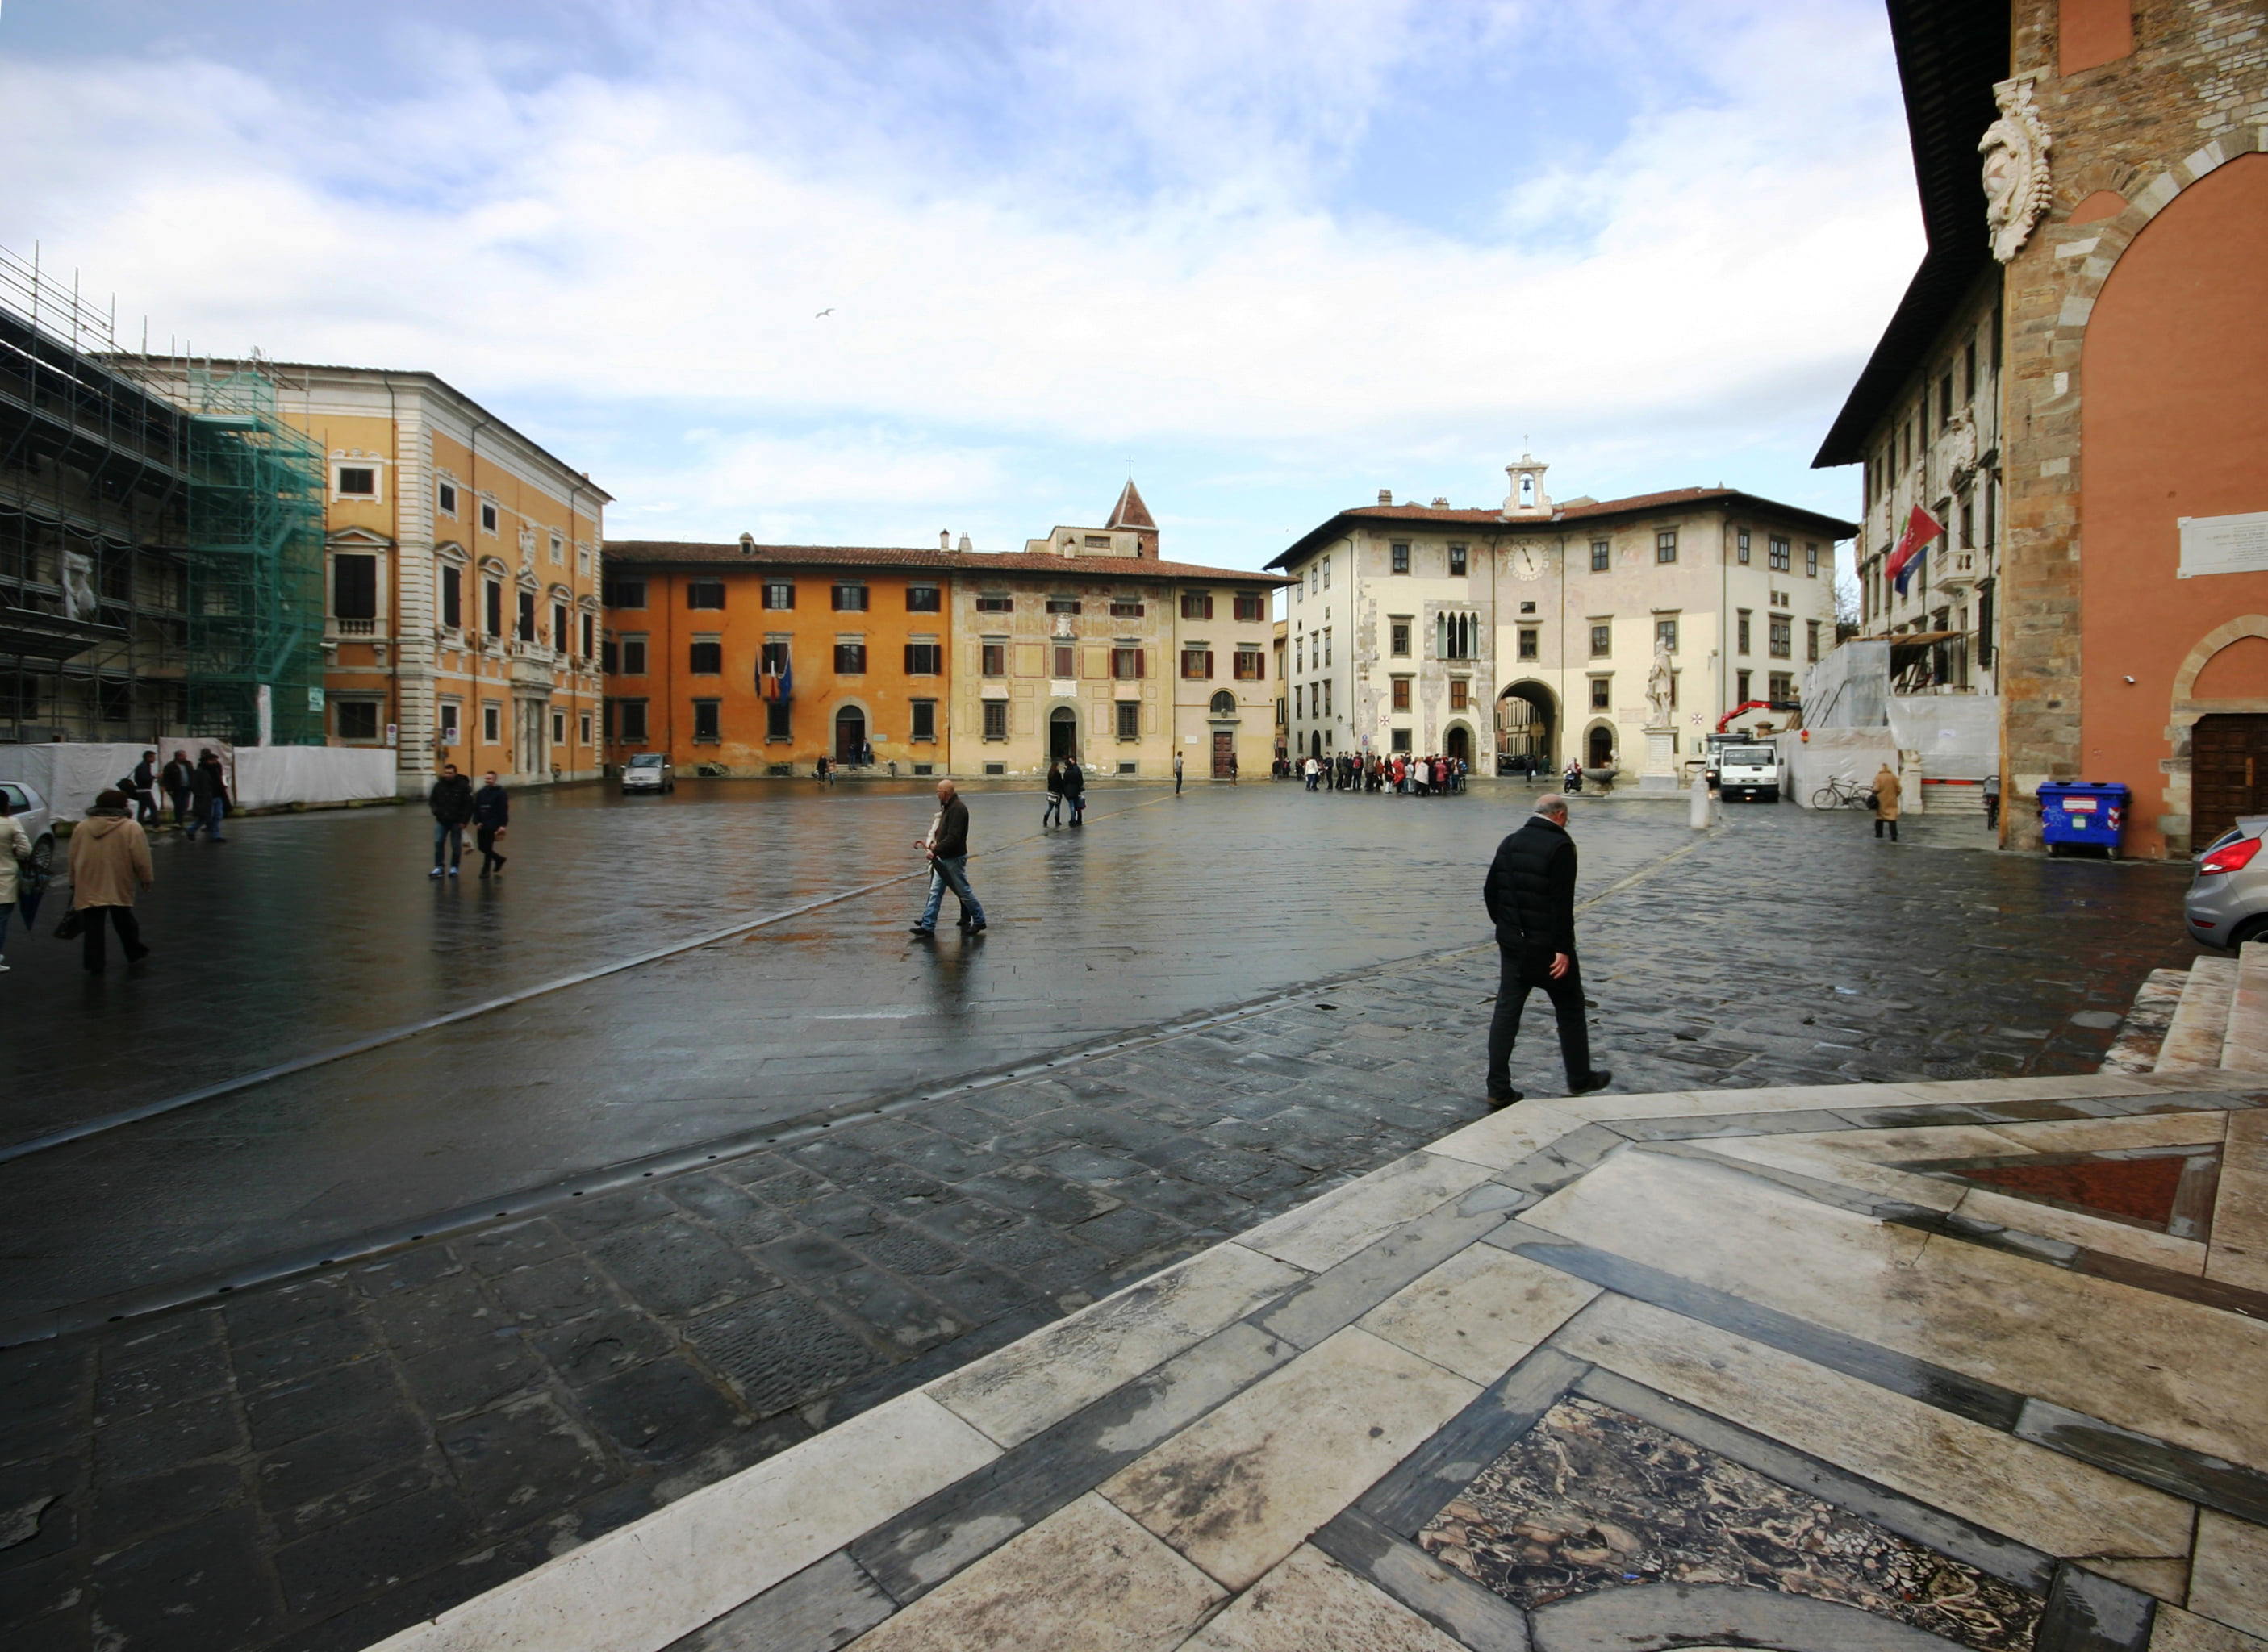 Knights' Square